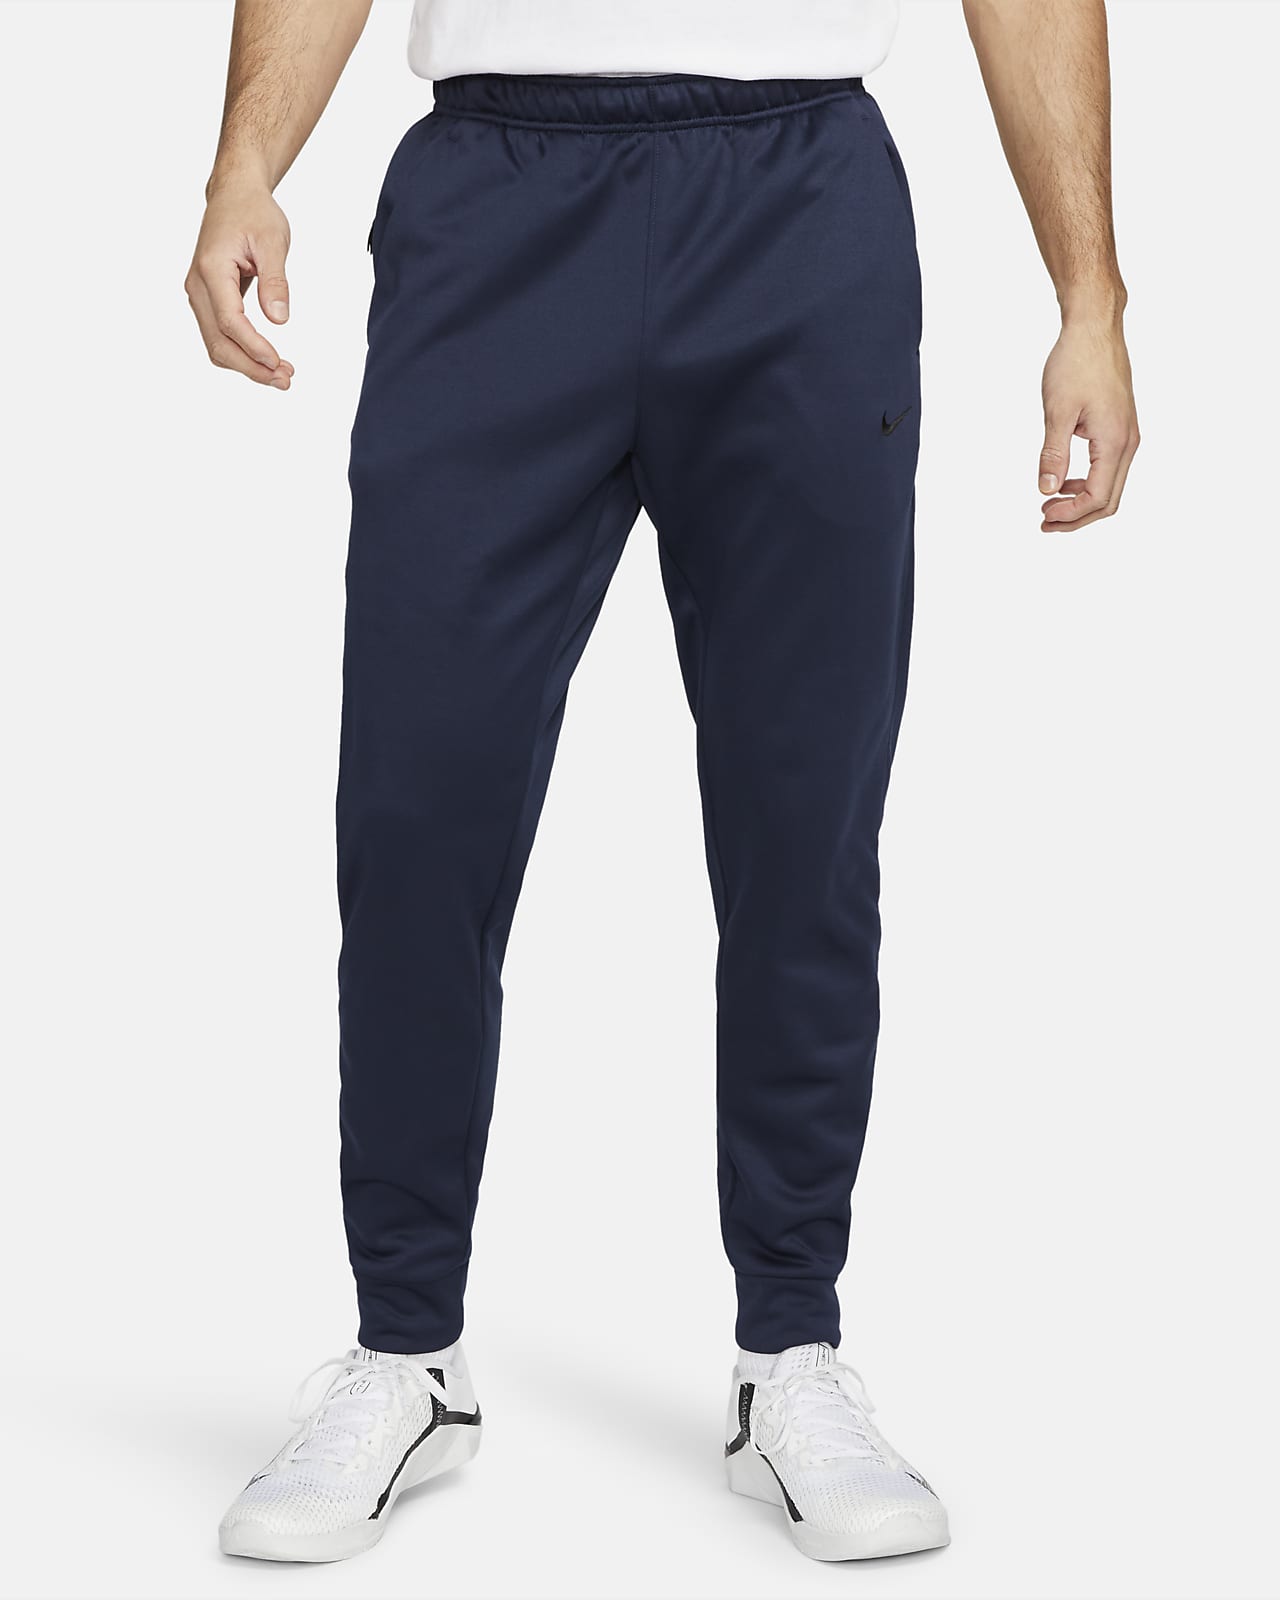 Nike Therma Pantalons cenyits de fitnes Therma-FIT - Home